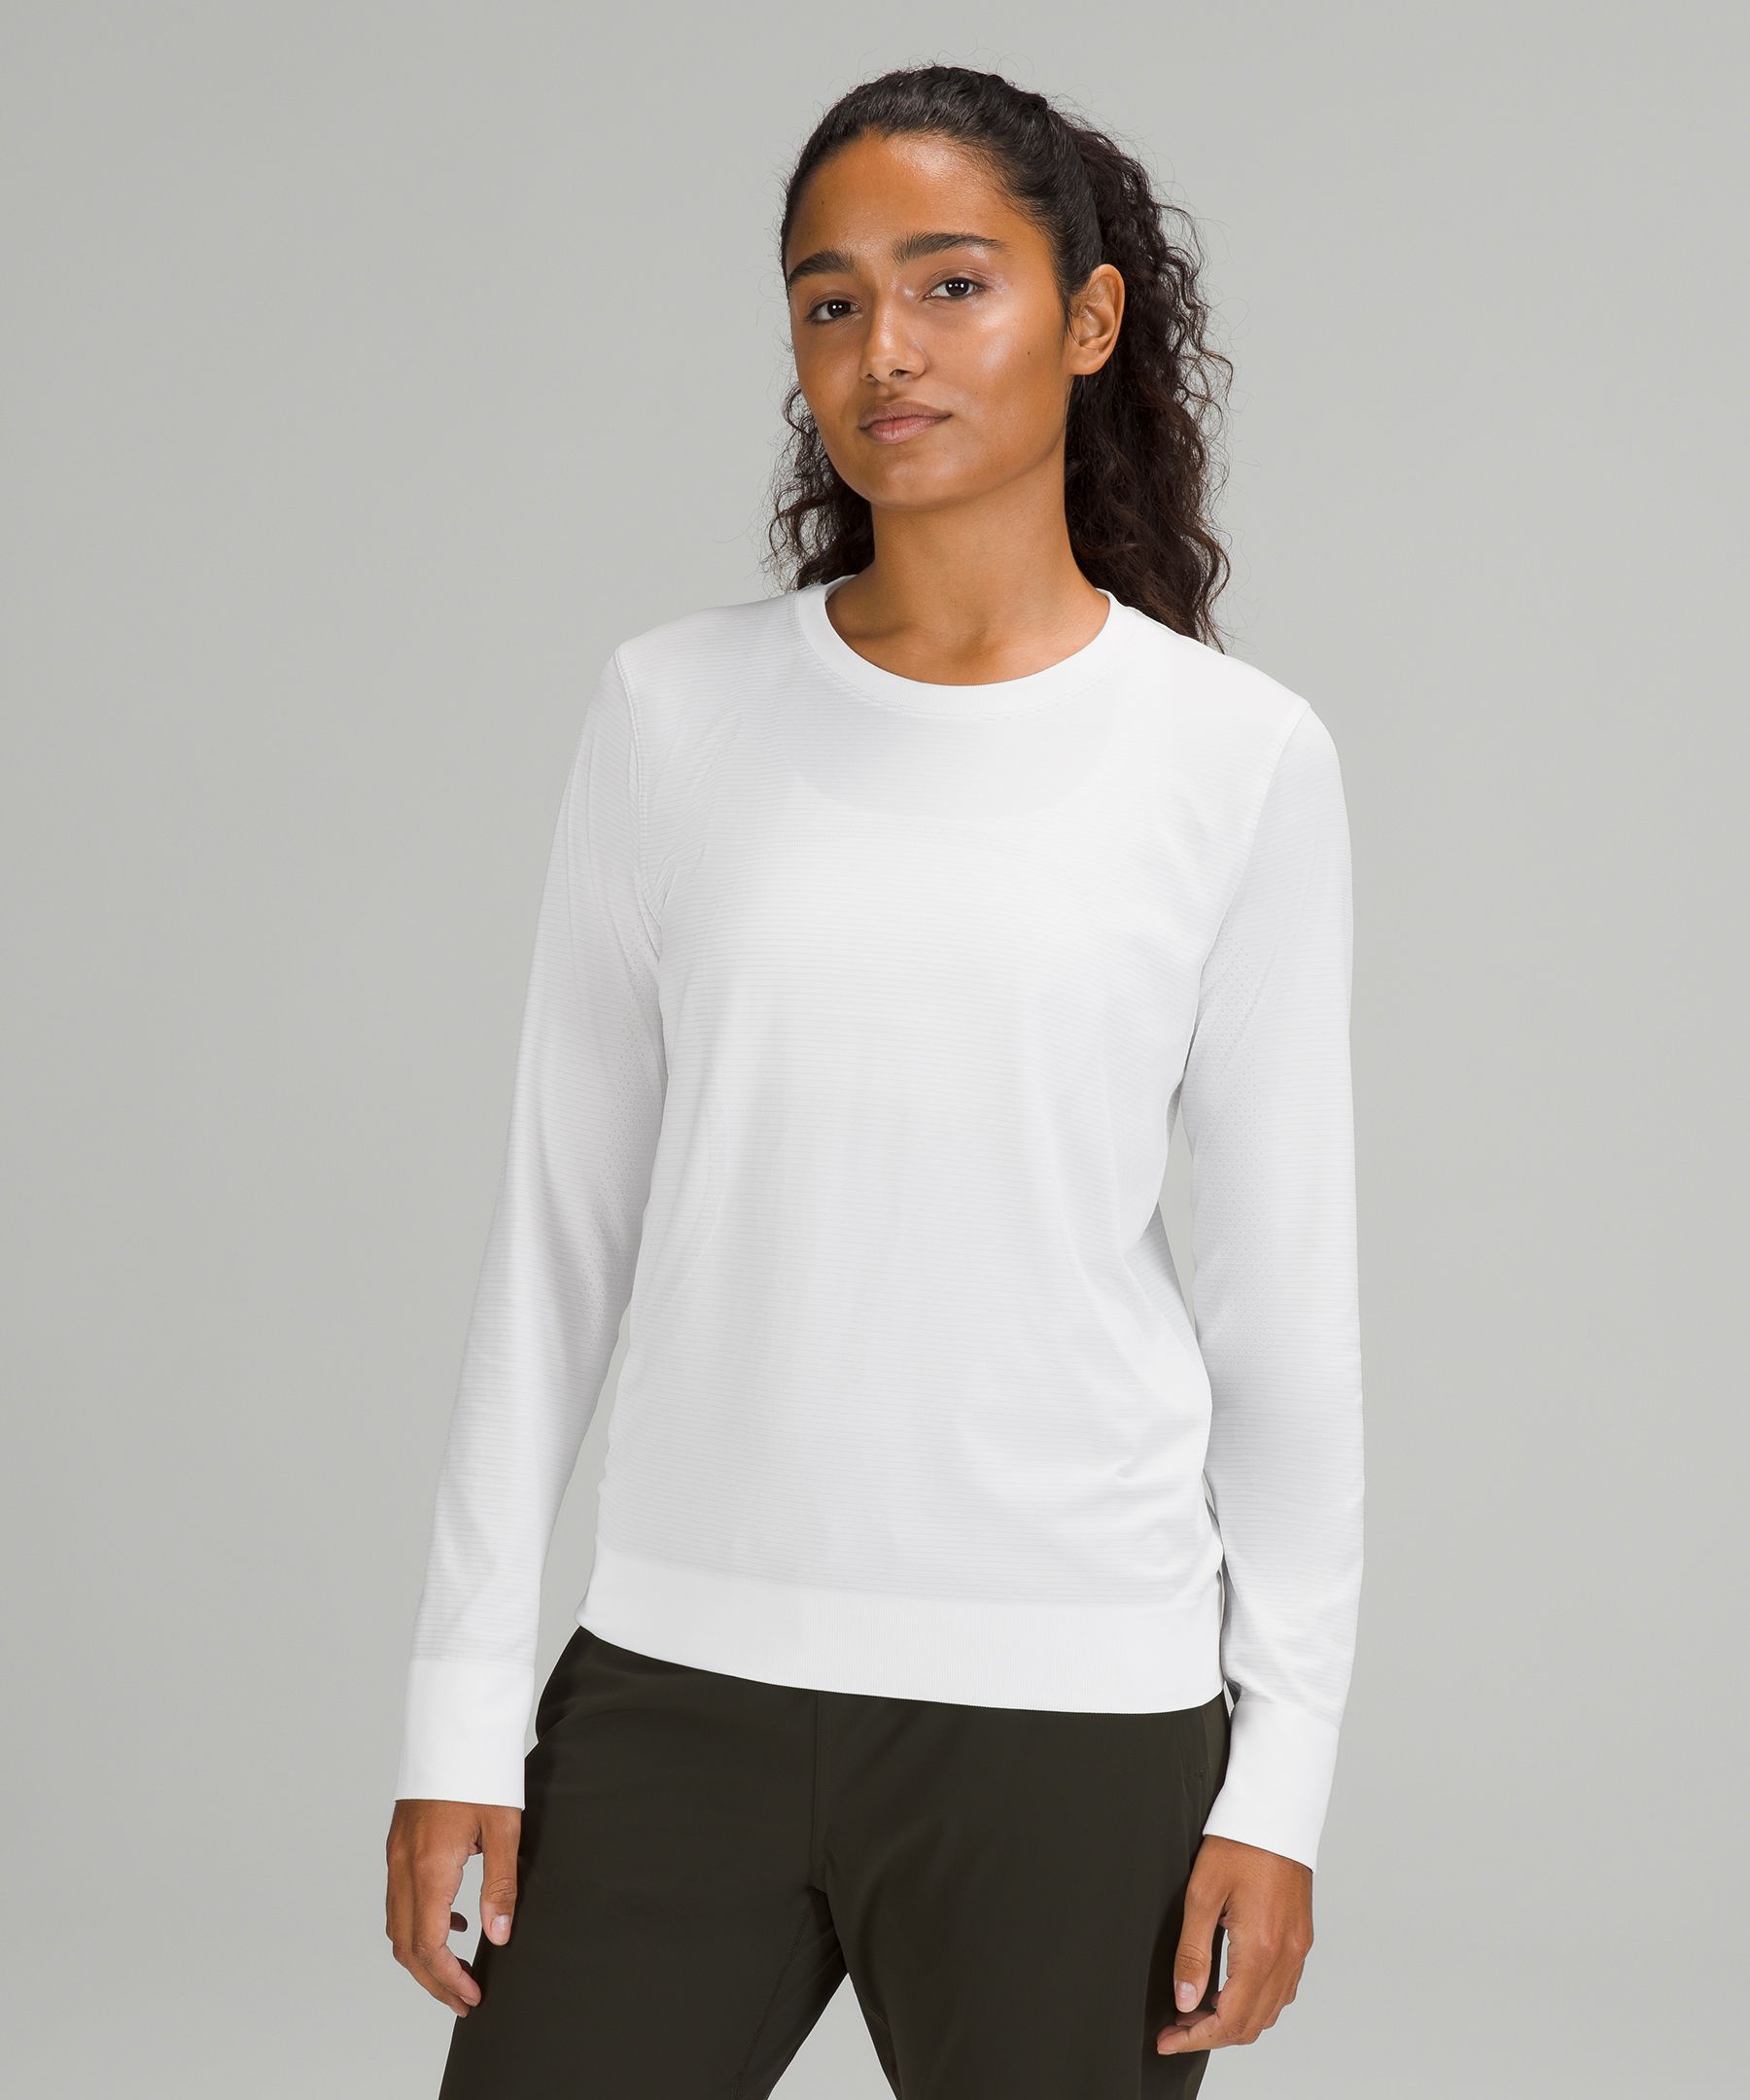 New Lululemon Swiftly Breathe Relaxed Fit Muscle Ghana